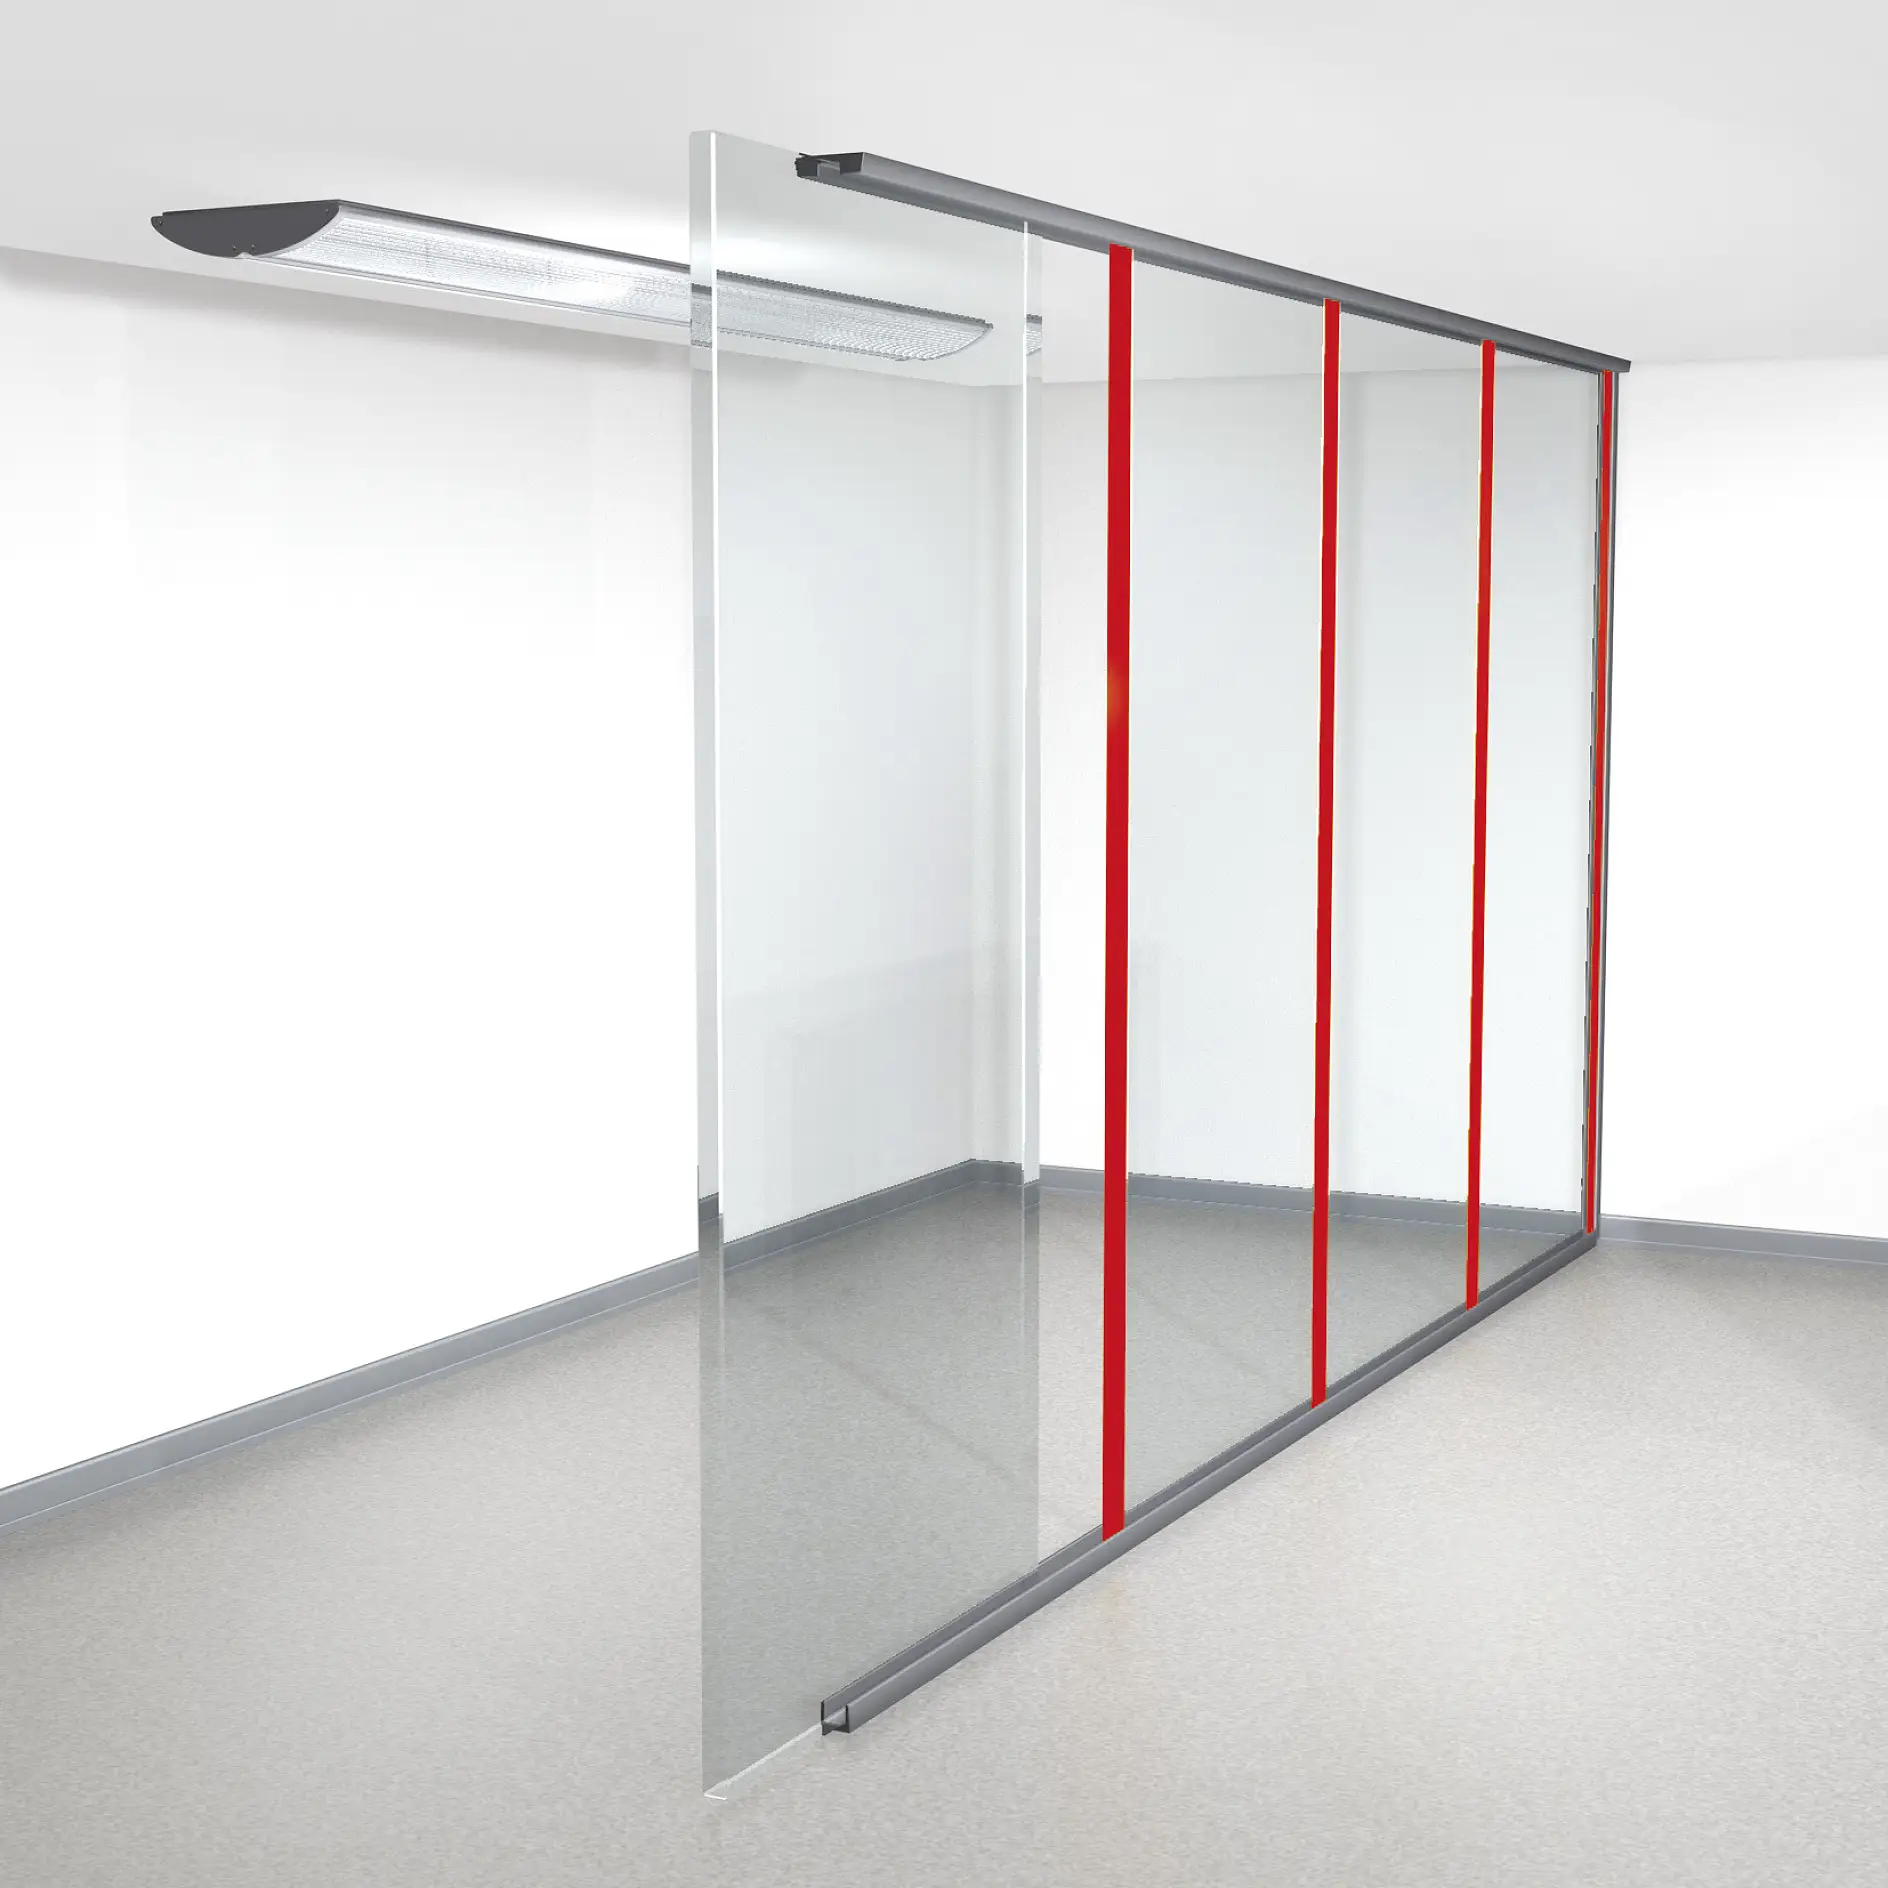 Tape solutions for I-profiles for office partitions